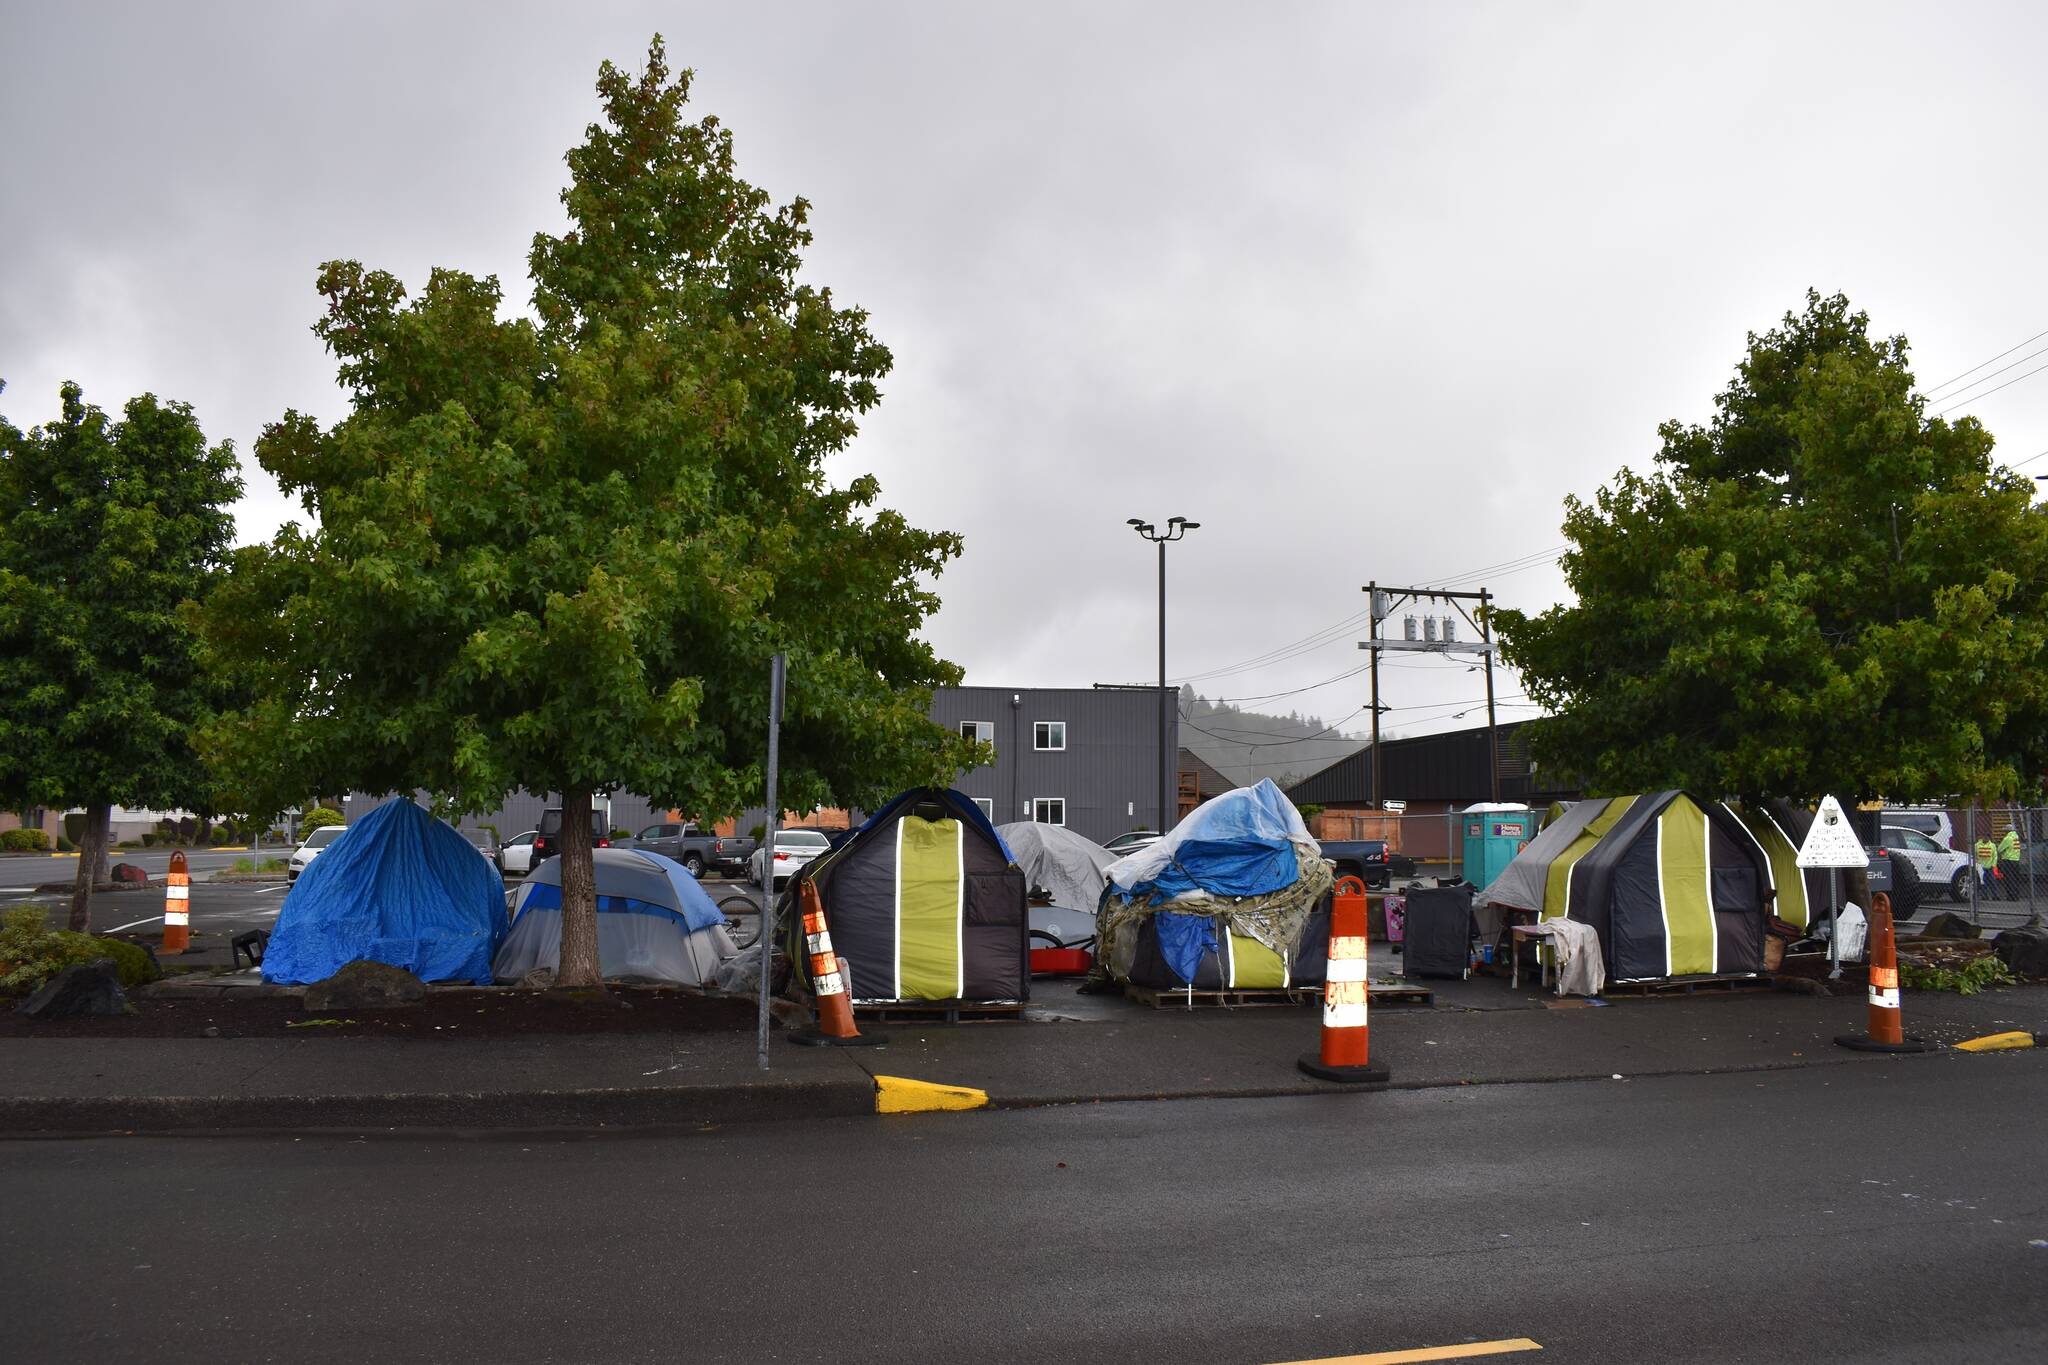 DAN HAMMOCK | THE DAILY WORLD
After the homeless tent camp next to Aberdeen City Hall, known as TASL, closed down in July, there were six campers left on the site. That number has grown to 10 or more and the city has no current legal recourse to remove them.